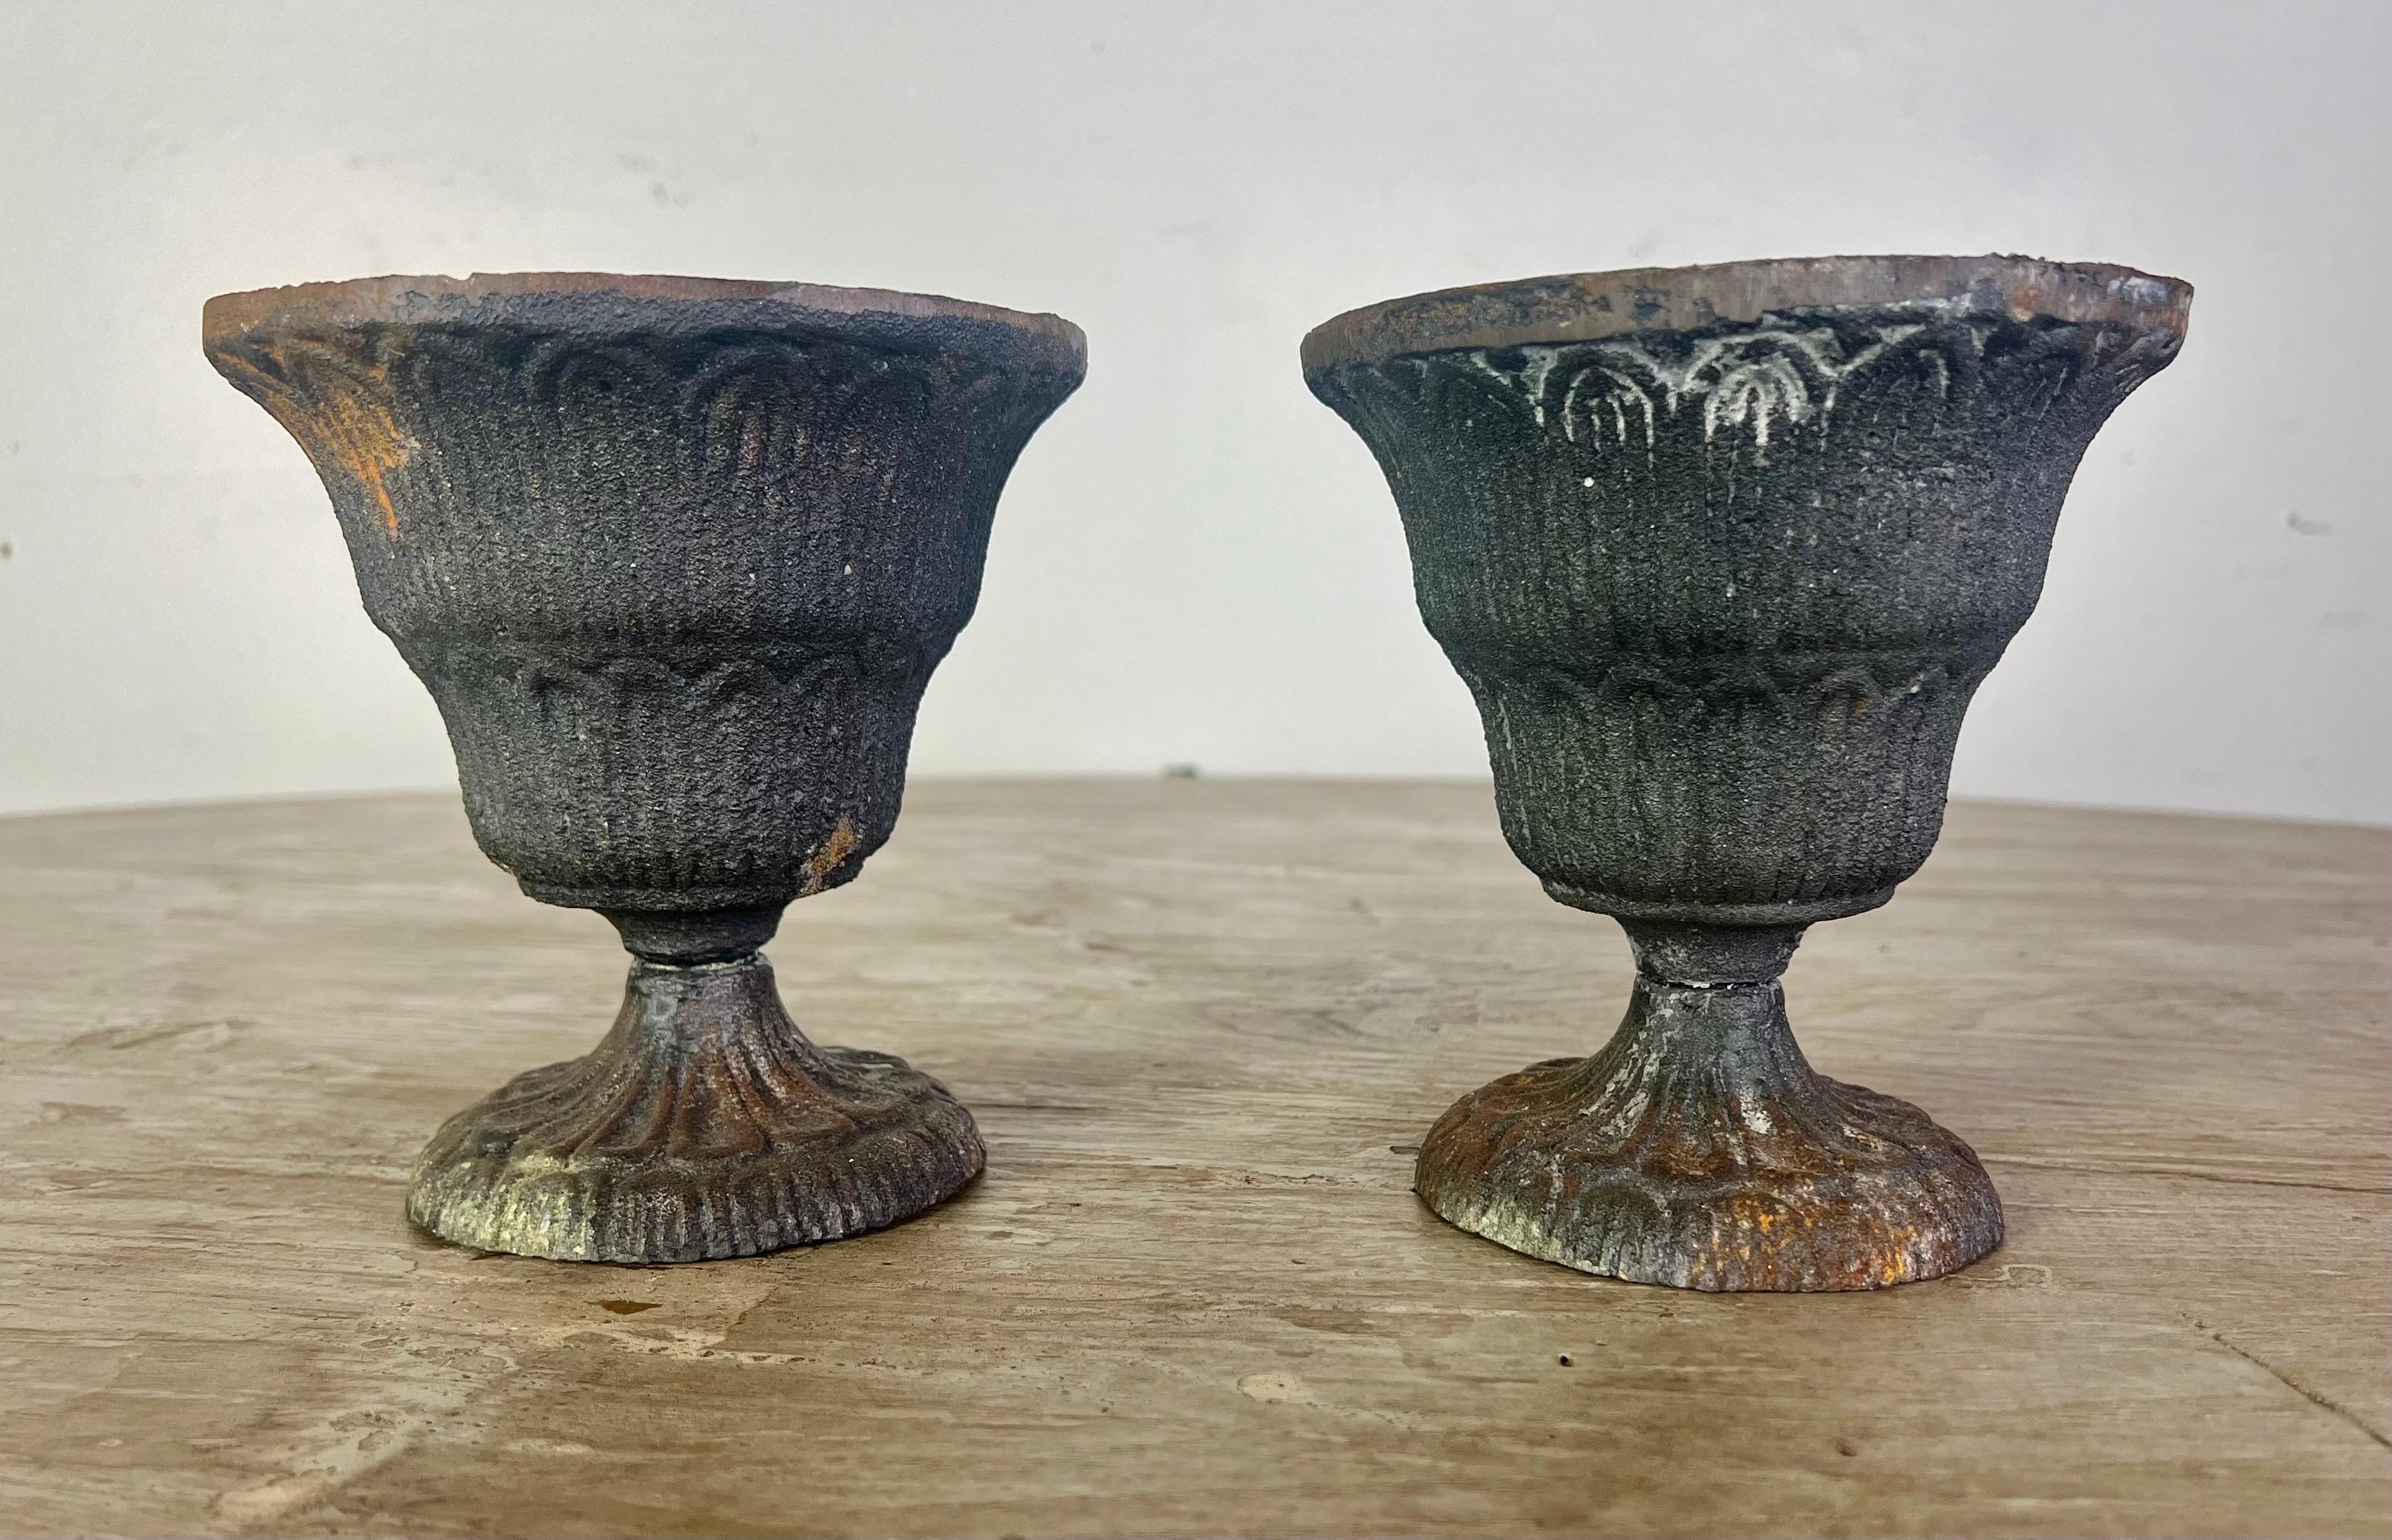 A pair of charming petite cast iron urns made in France would make for a great accessory, whether placed in your garden or used as decorative pieces in your home.  They add a touch of rustic elegance to any space.